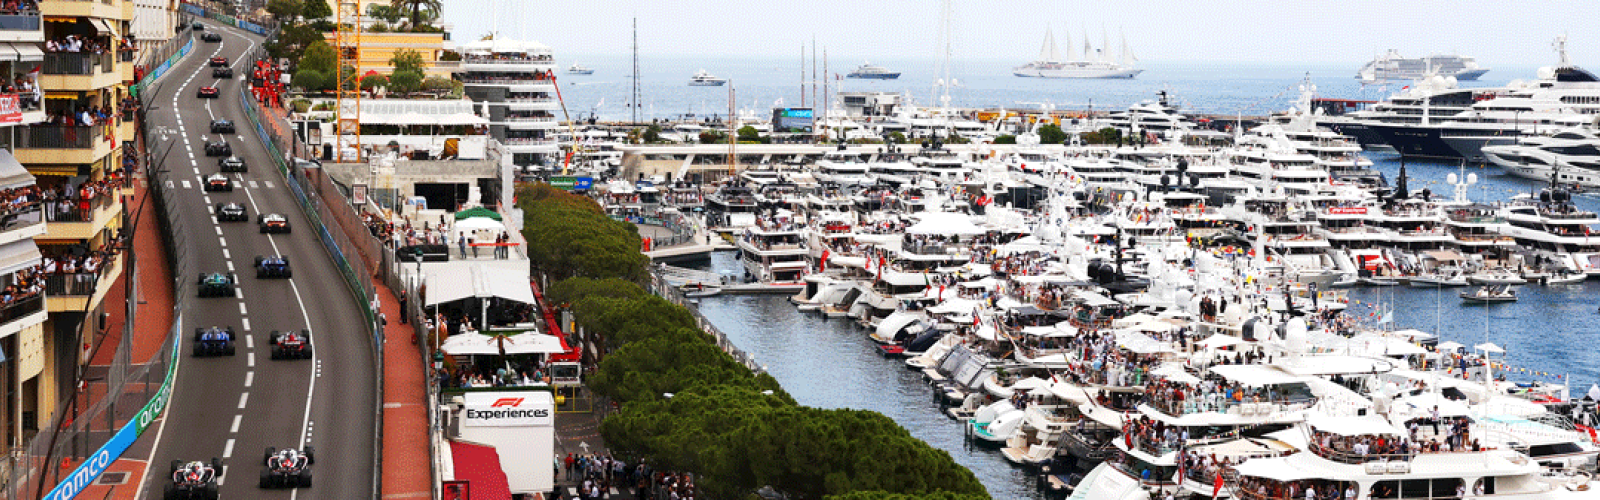 The Monaco Grand Prix TM is a mythical race and all pilots dream to win on the circuit of the Principality